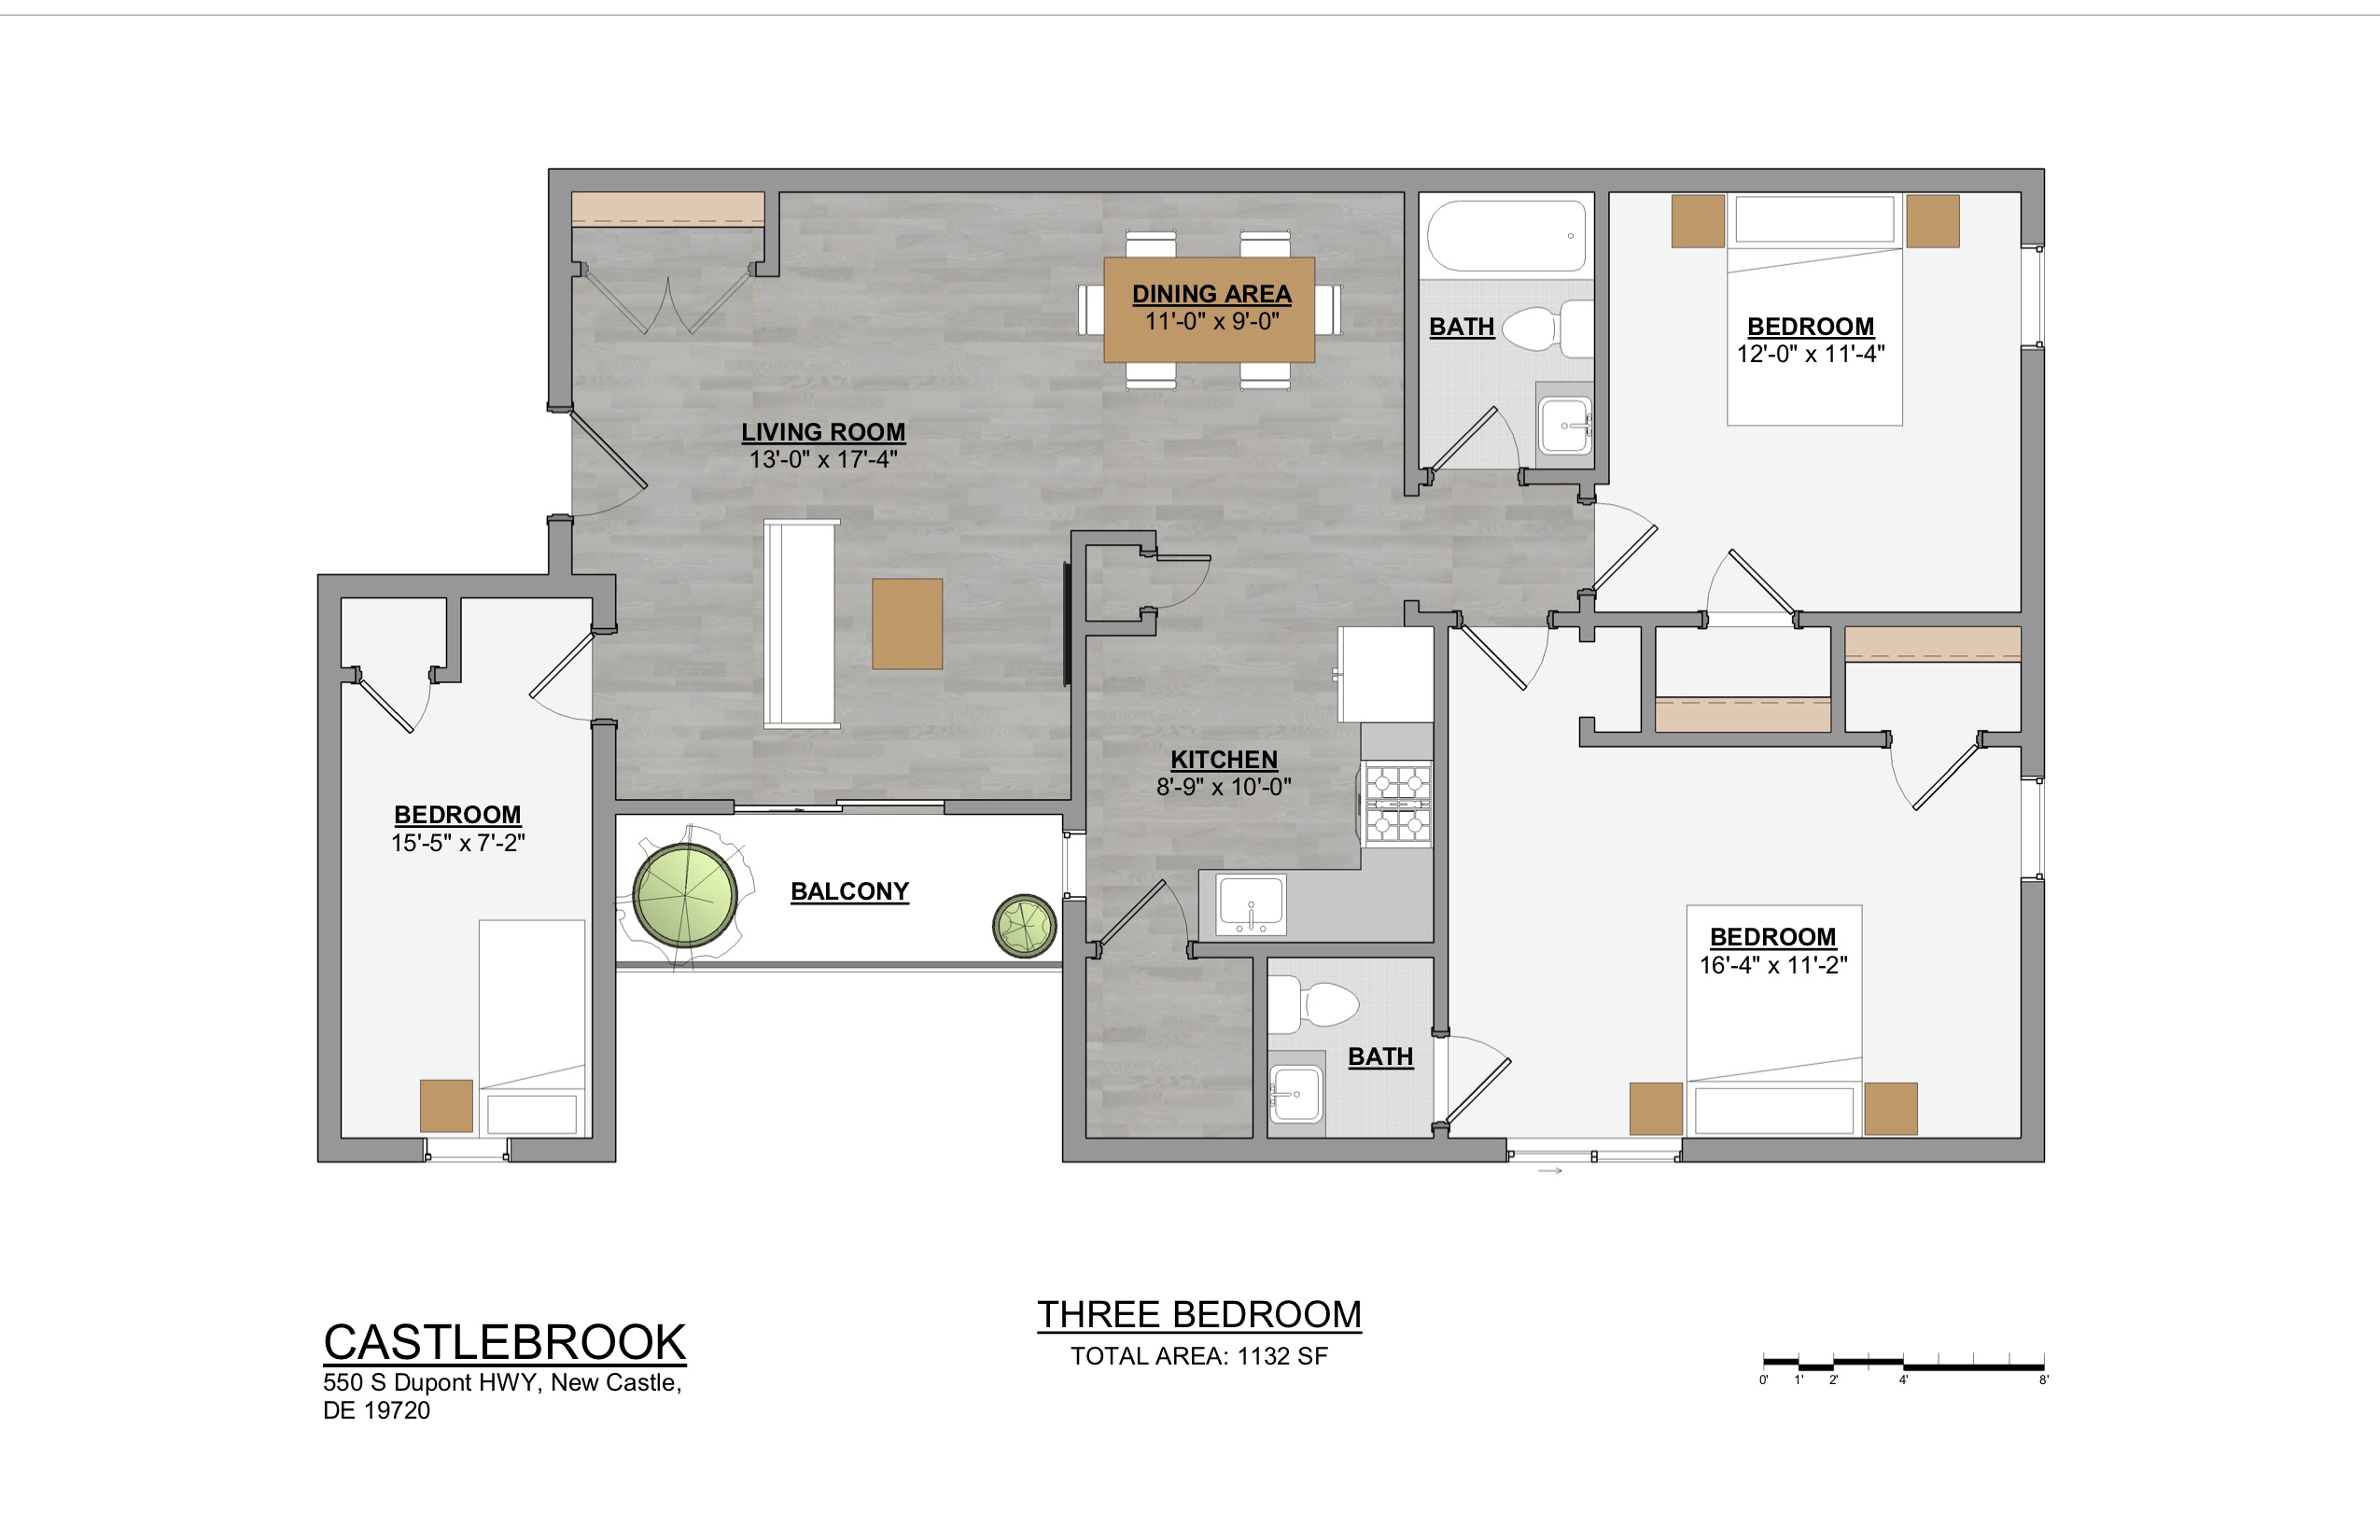 3-bedroom New Castle, DE rental with balcony and 2-bathrooms at the Castlebrook Apartments 